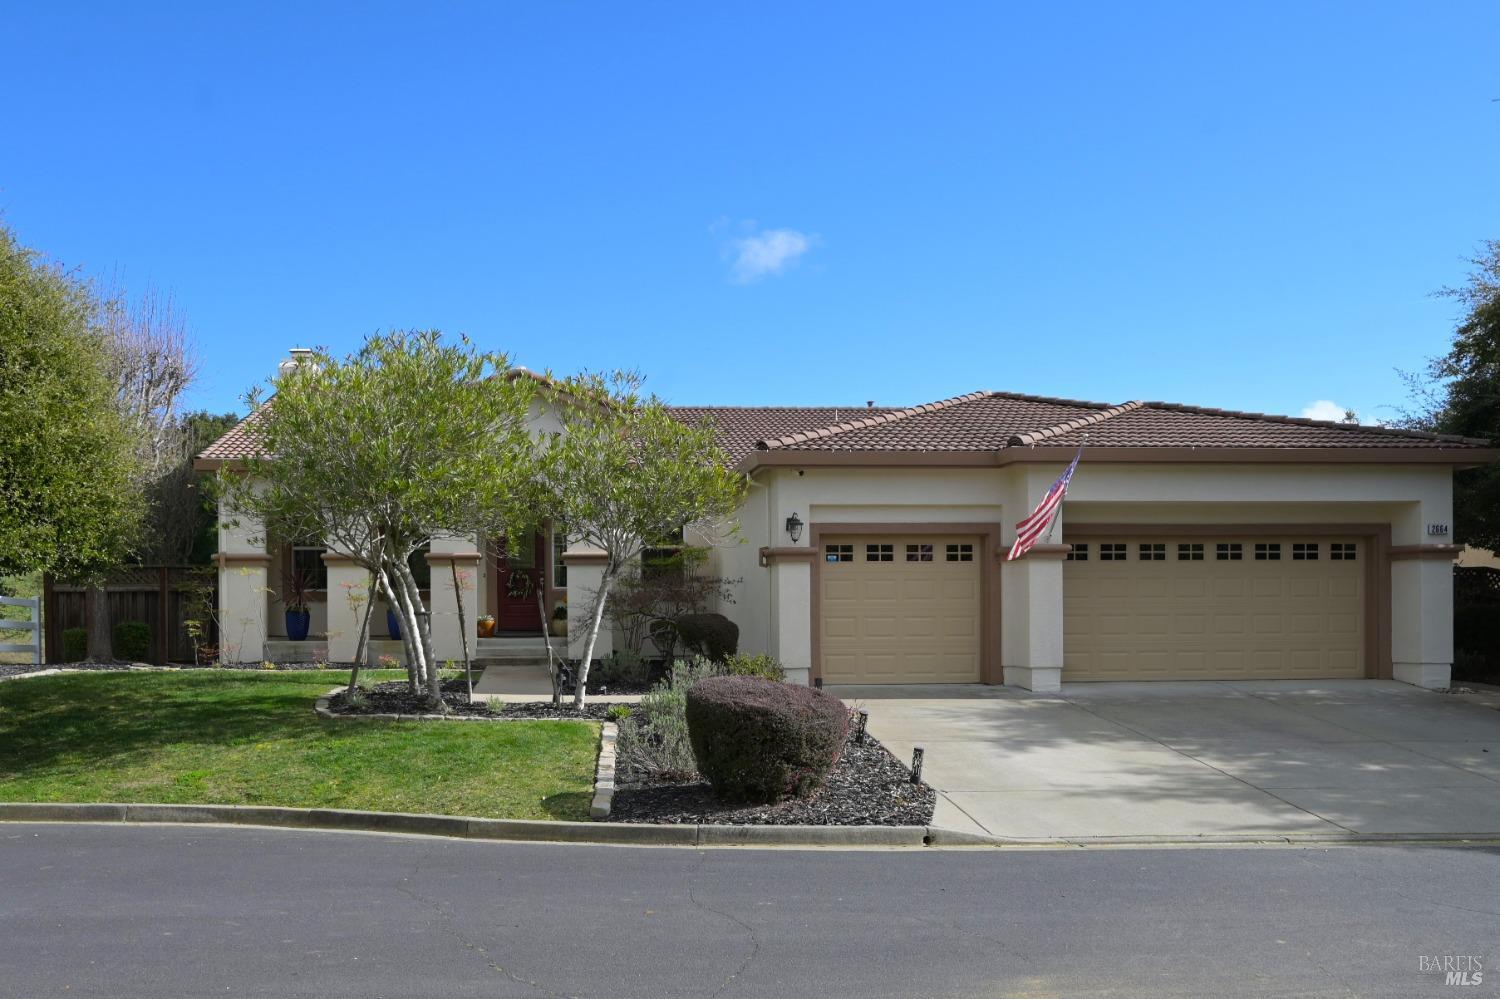 Welcome to 2664 Avocet in Vallejo. Nestled in a serene cul-de-sac on the golf course, this fabulous 